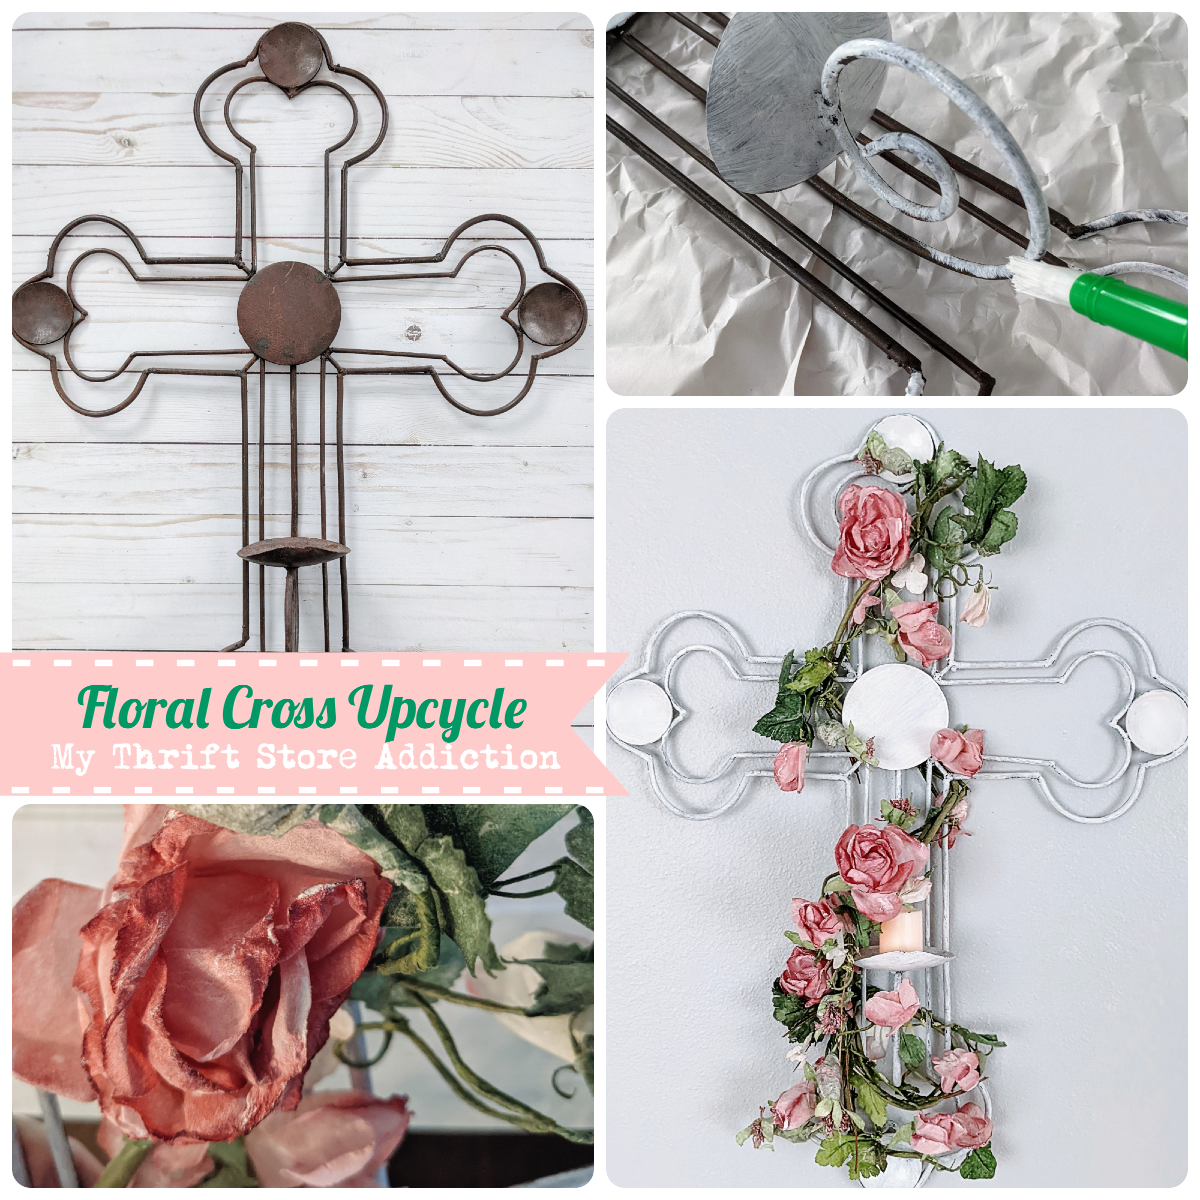 Floral cross upcycle